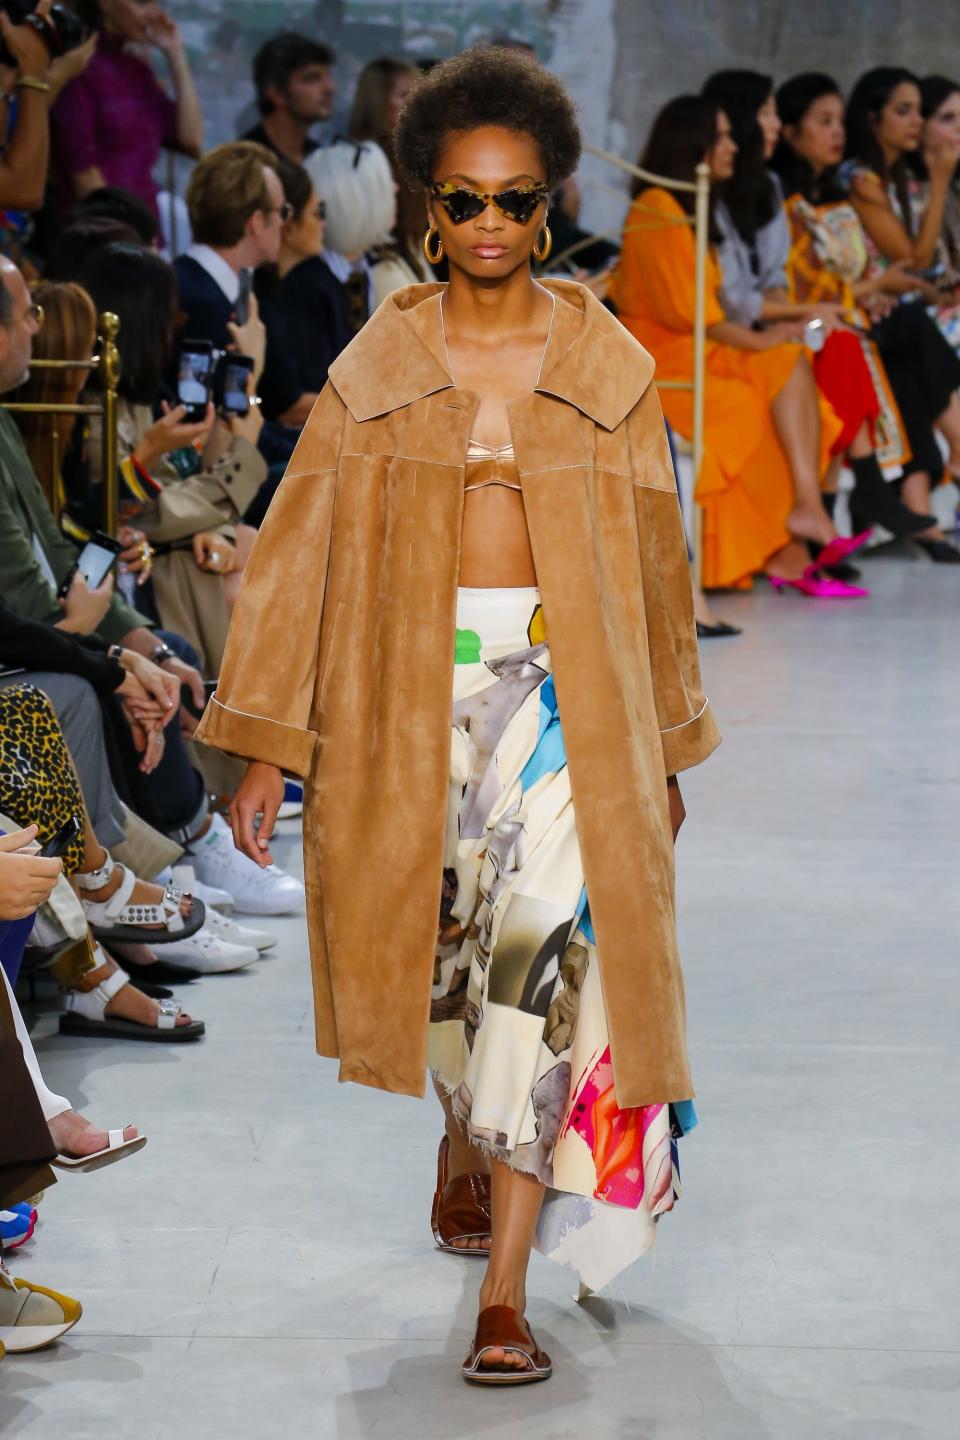 After the Spring 2019 fashion shows, Vogue is declaring these the most game-changing trends of Spring 2019, from boxy blazers to a new kind of couture.